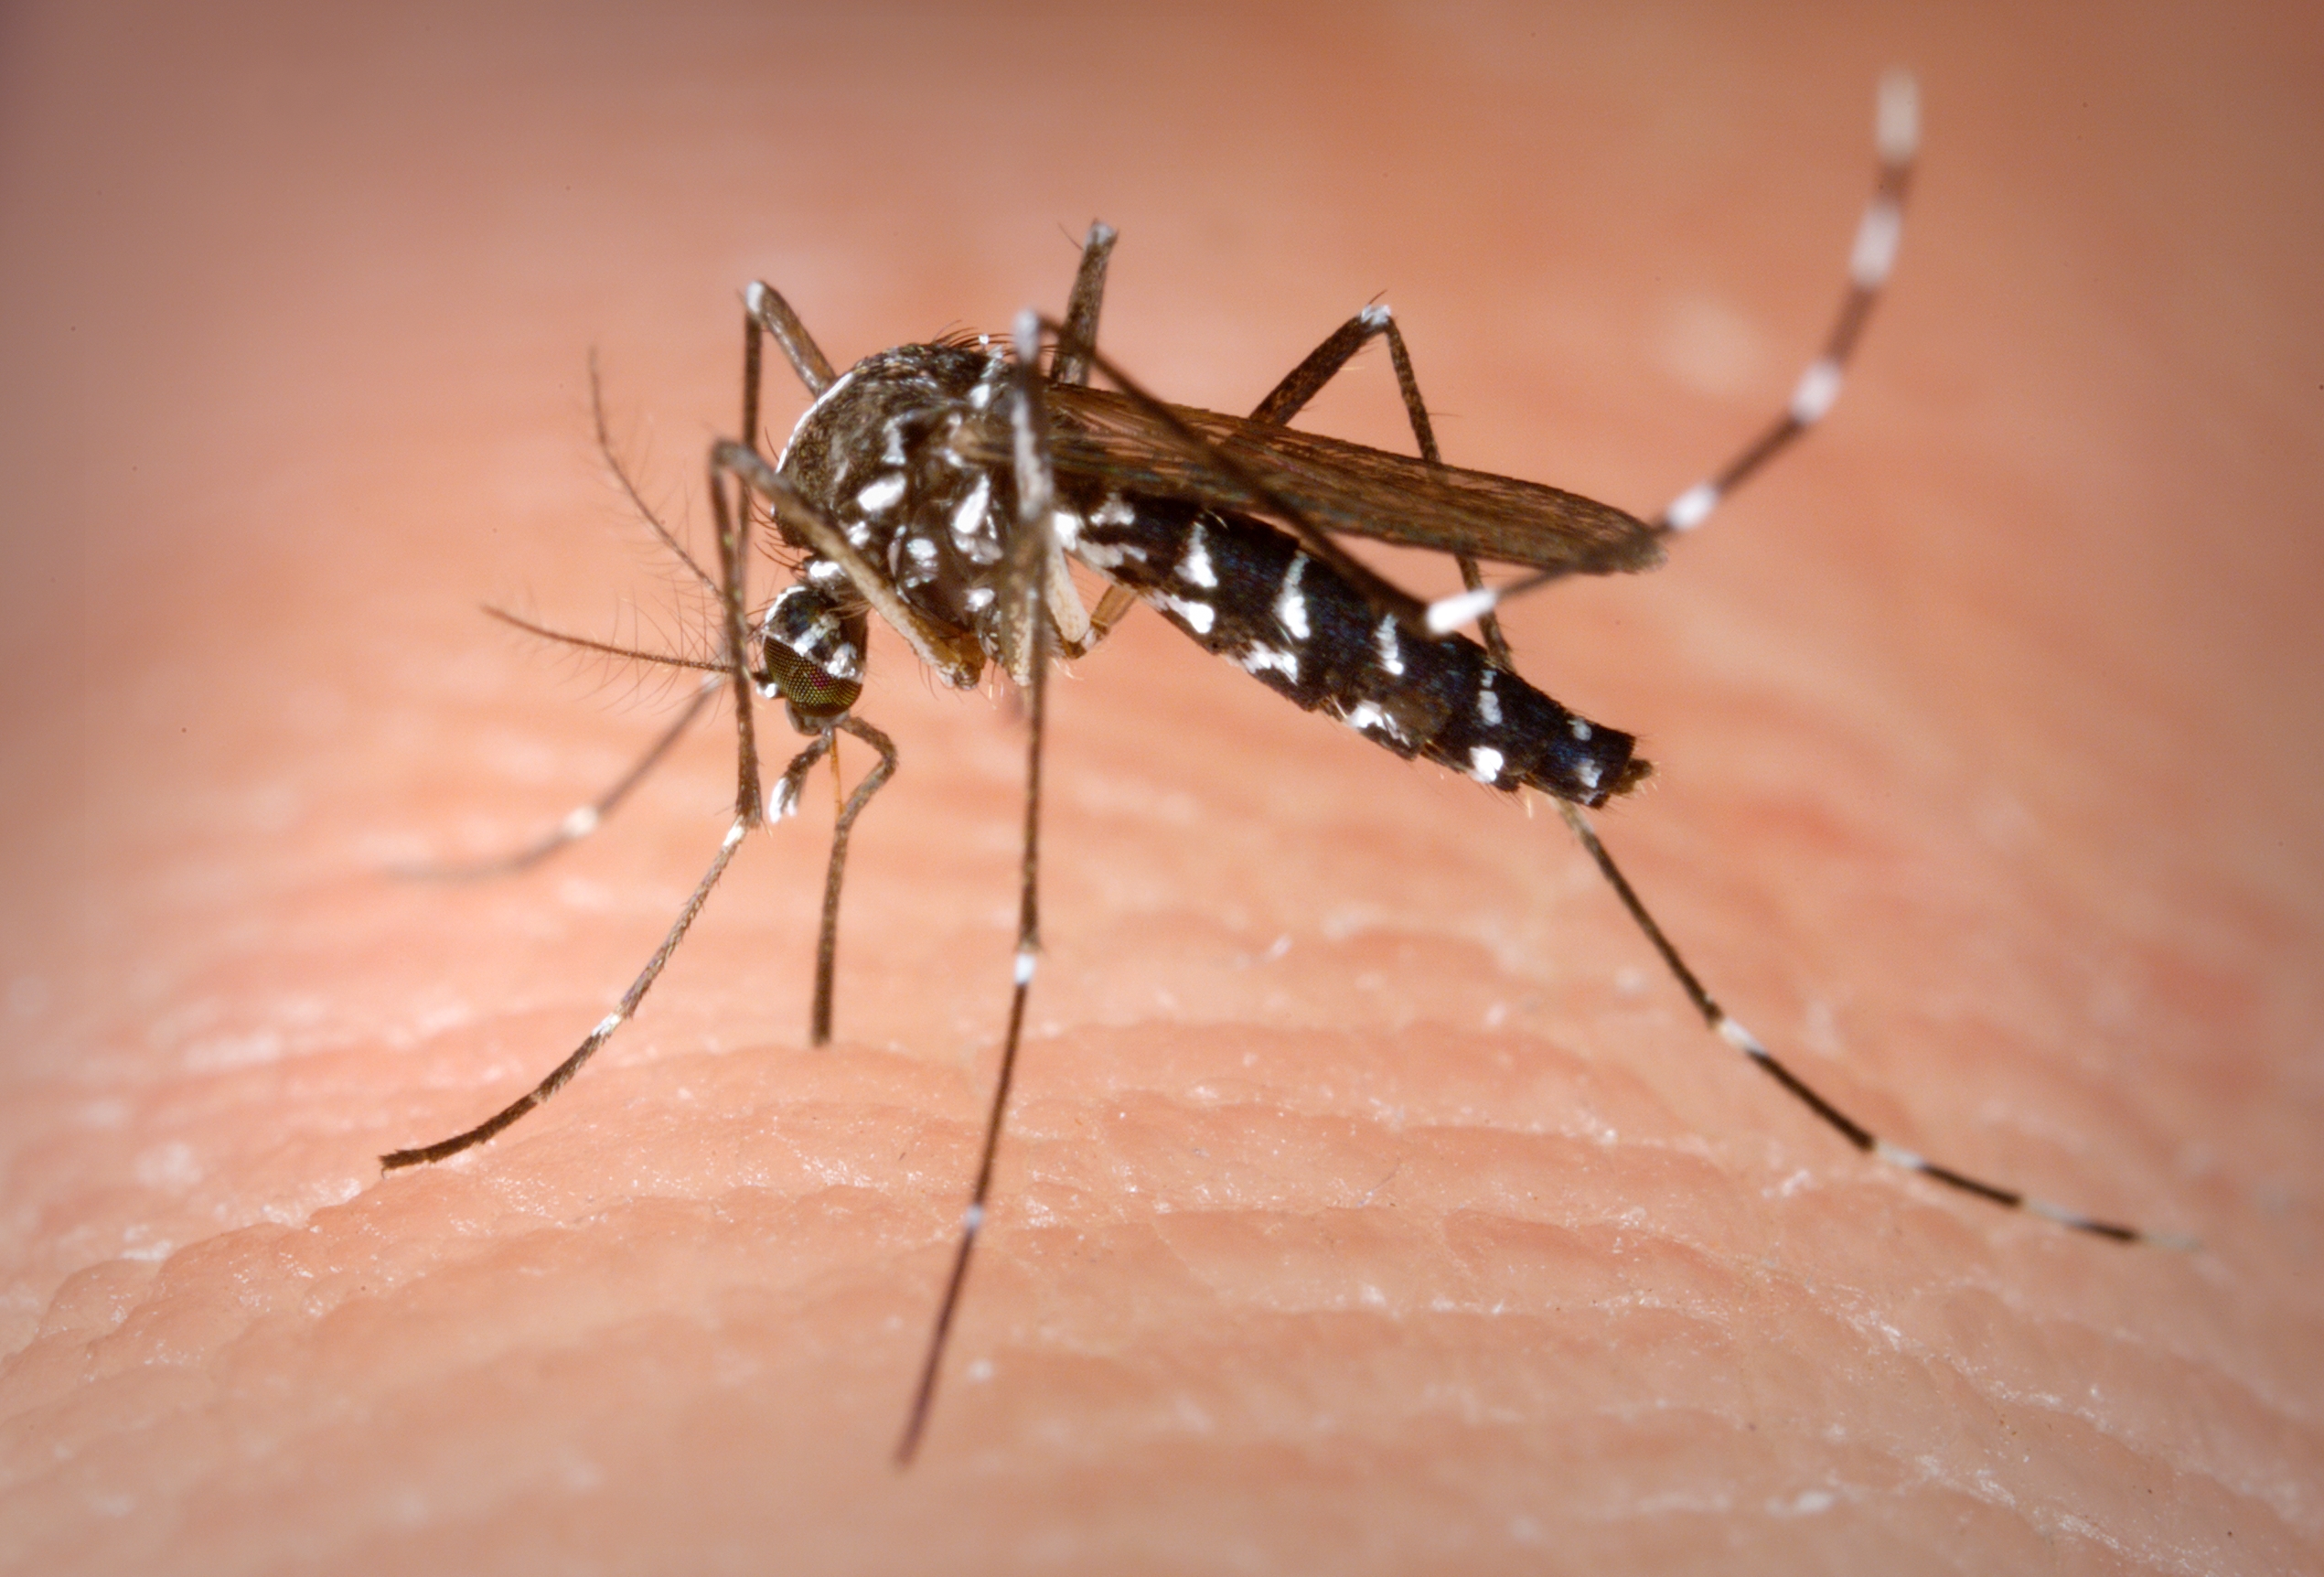 Male mosquitoes don’t want your blood, but they still find you very attractive